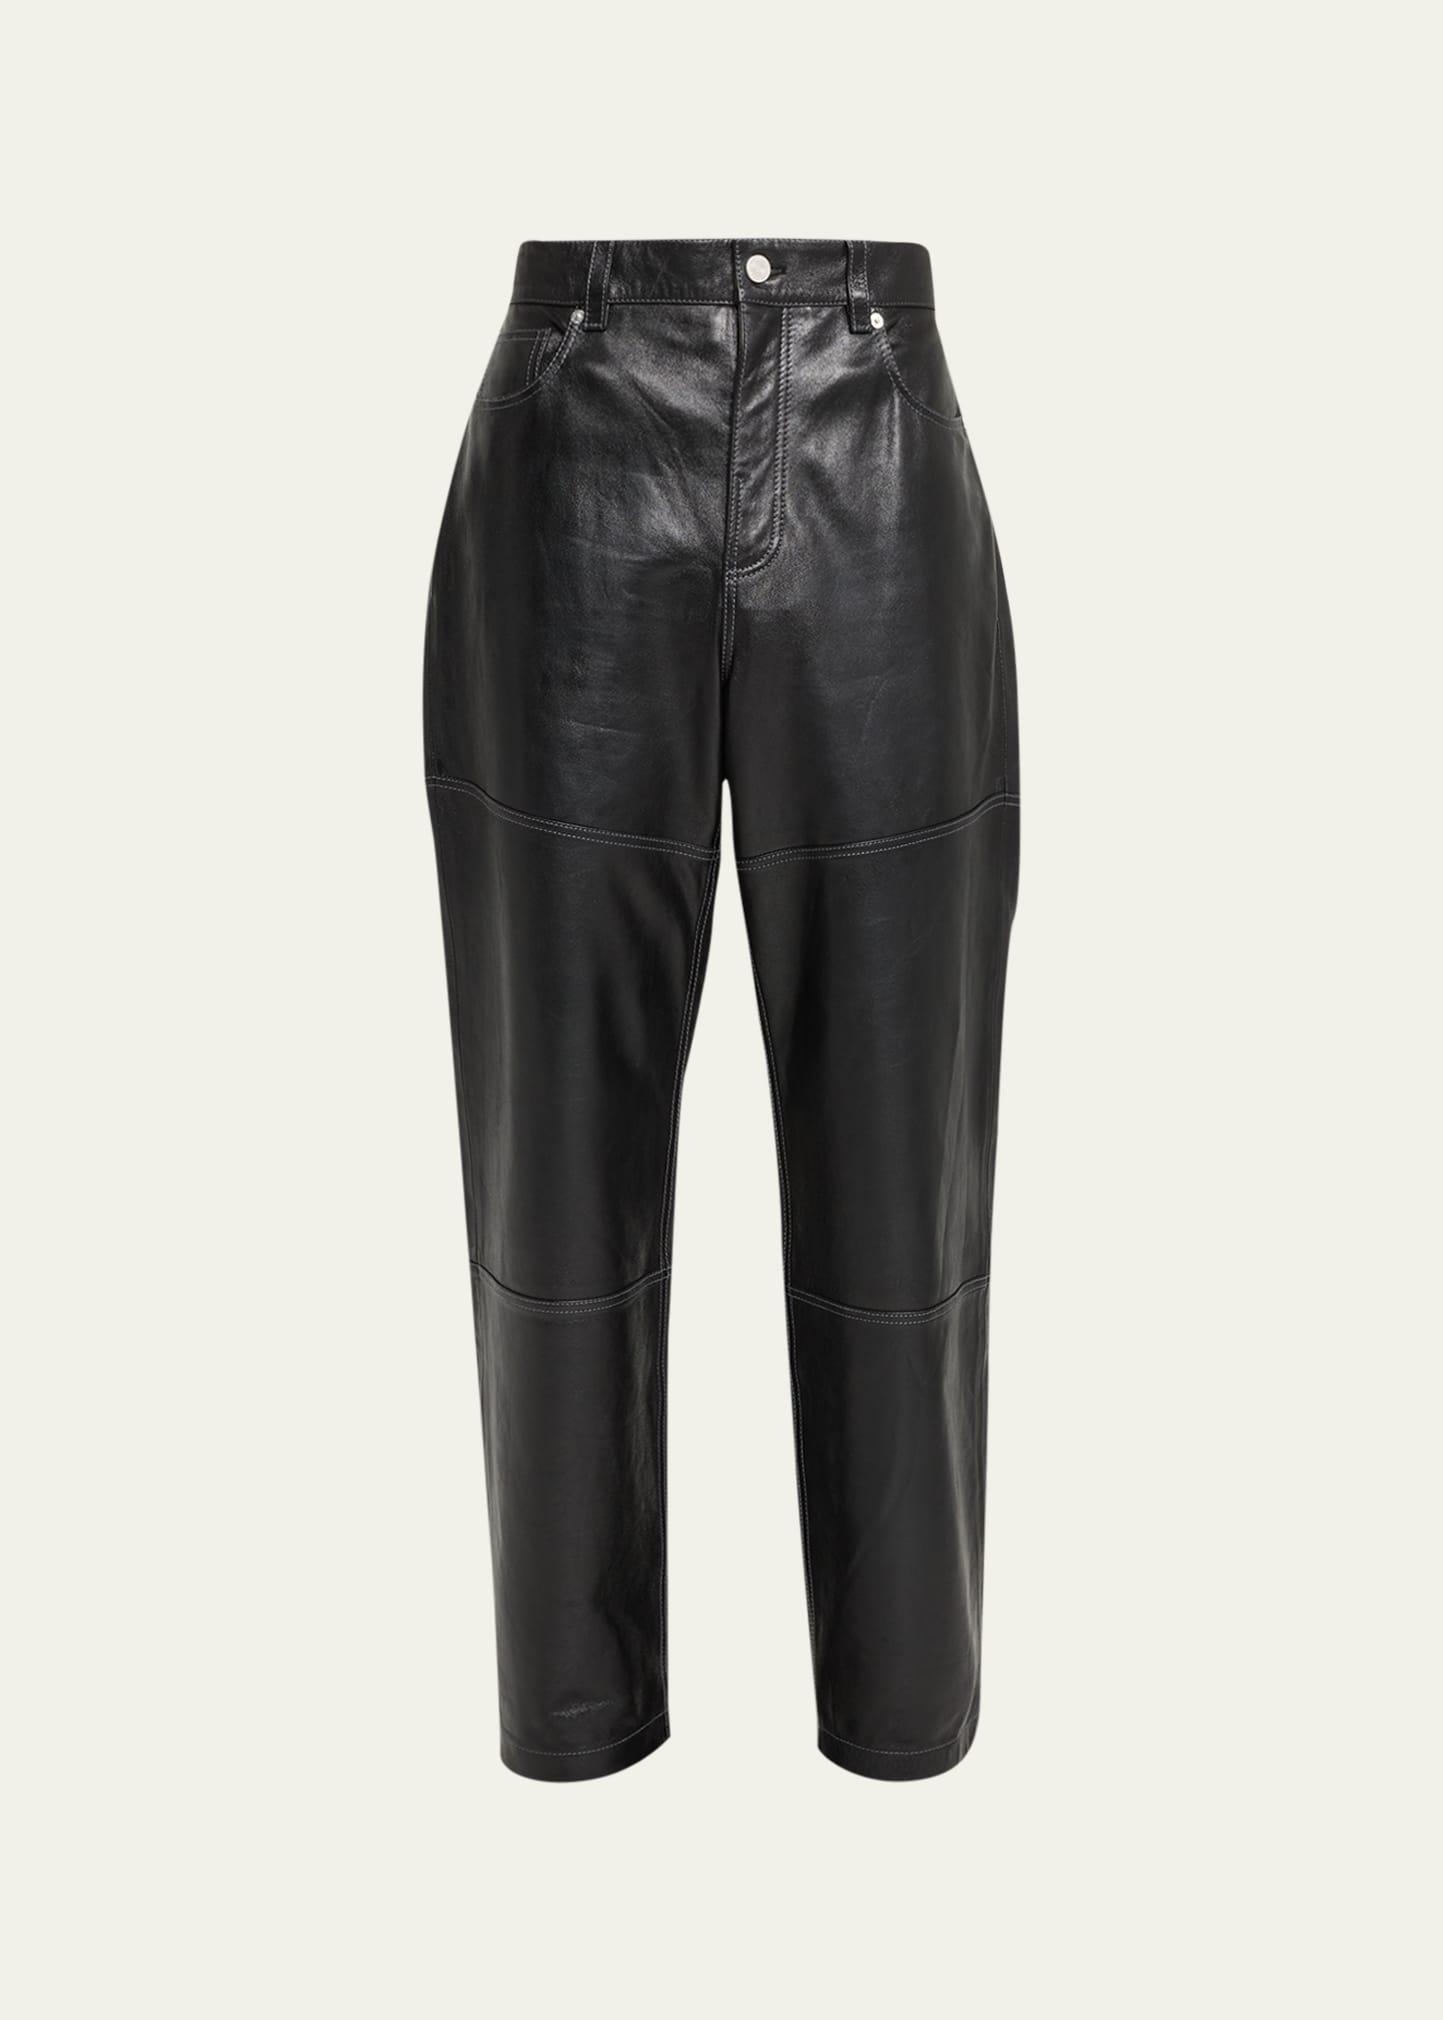 Mens Paneled Loose-Fit Leather Trousers Product Image